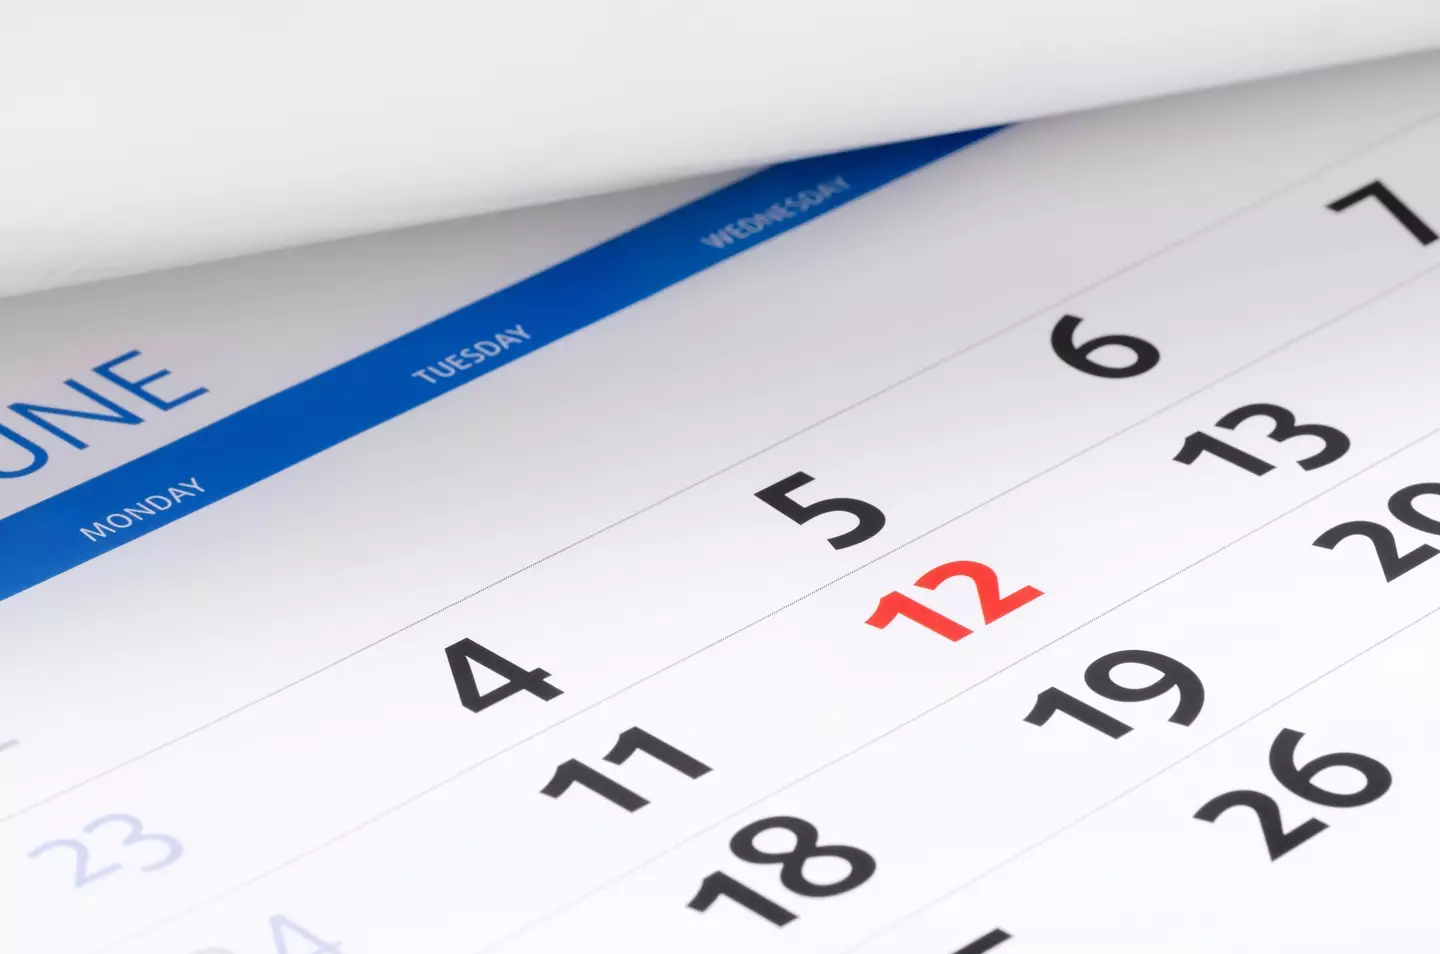 Due to the bank holidays next year, you could actually get up to 48 days off, by using just 19 days of annual leave.